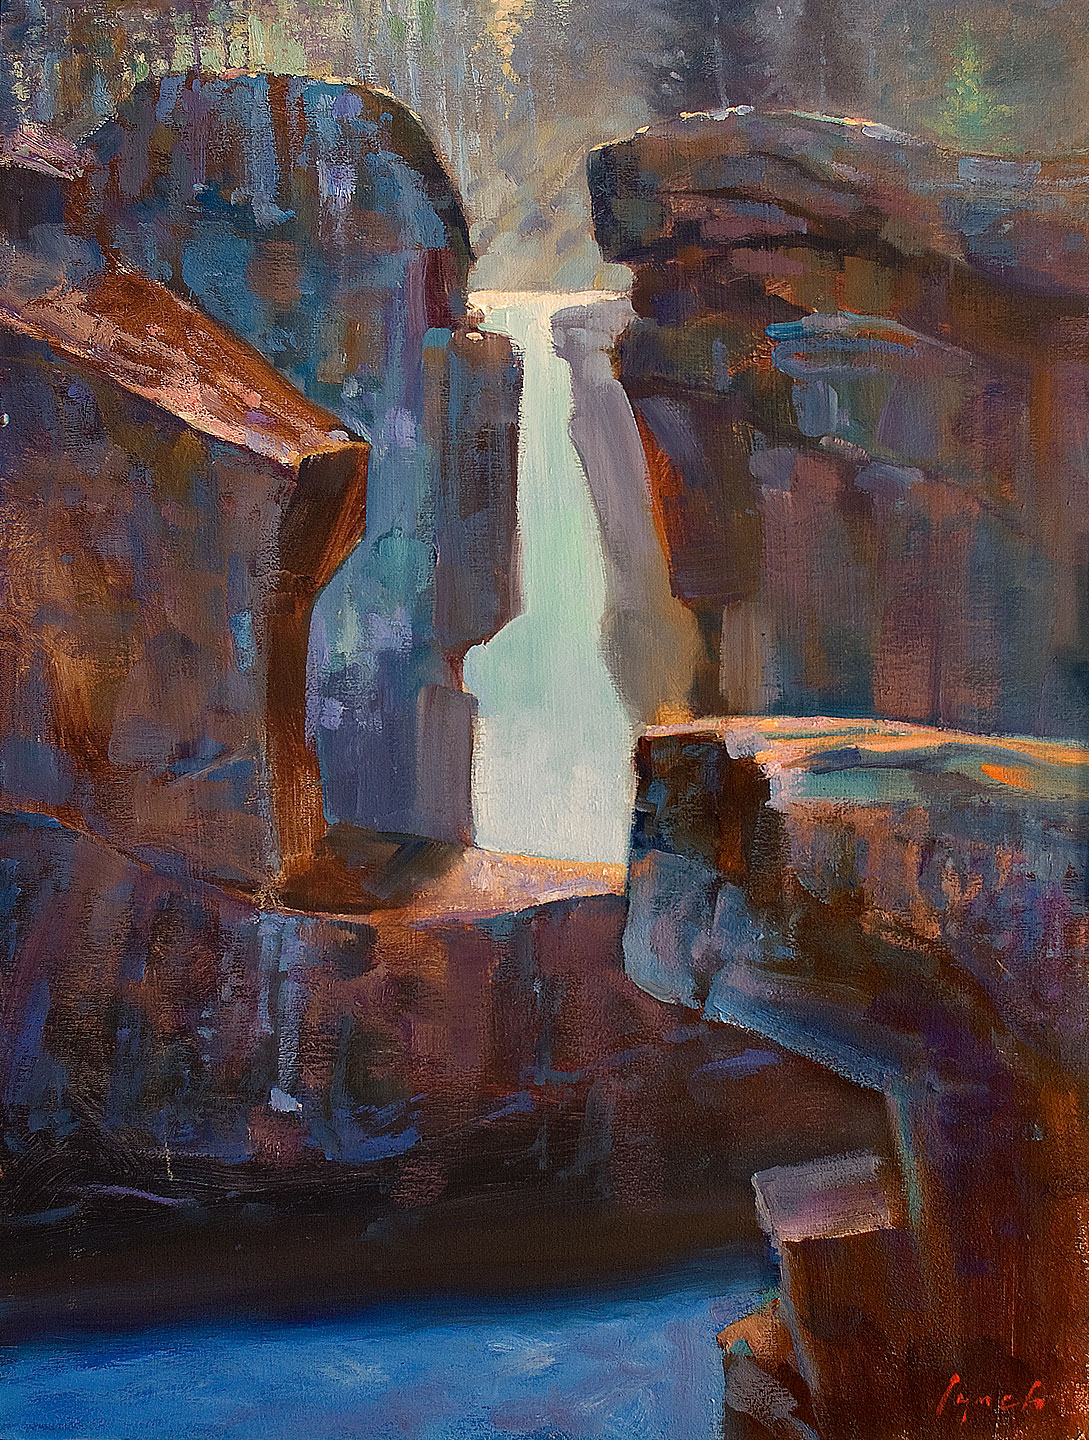 Narin Falls, Whistler BC. 16 X 20 in. oil on canvas